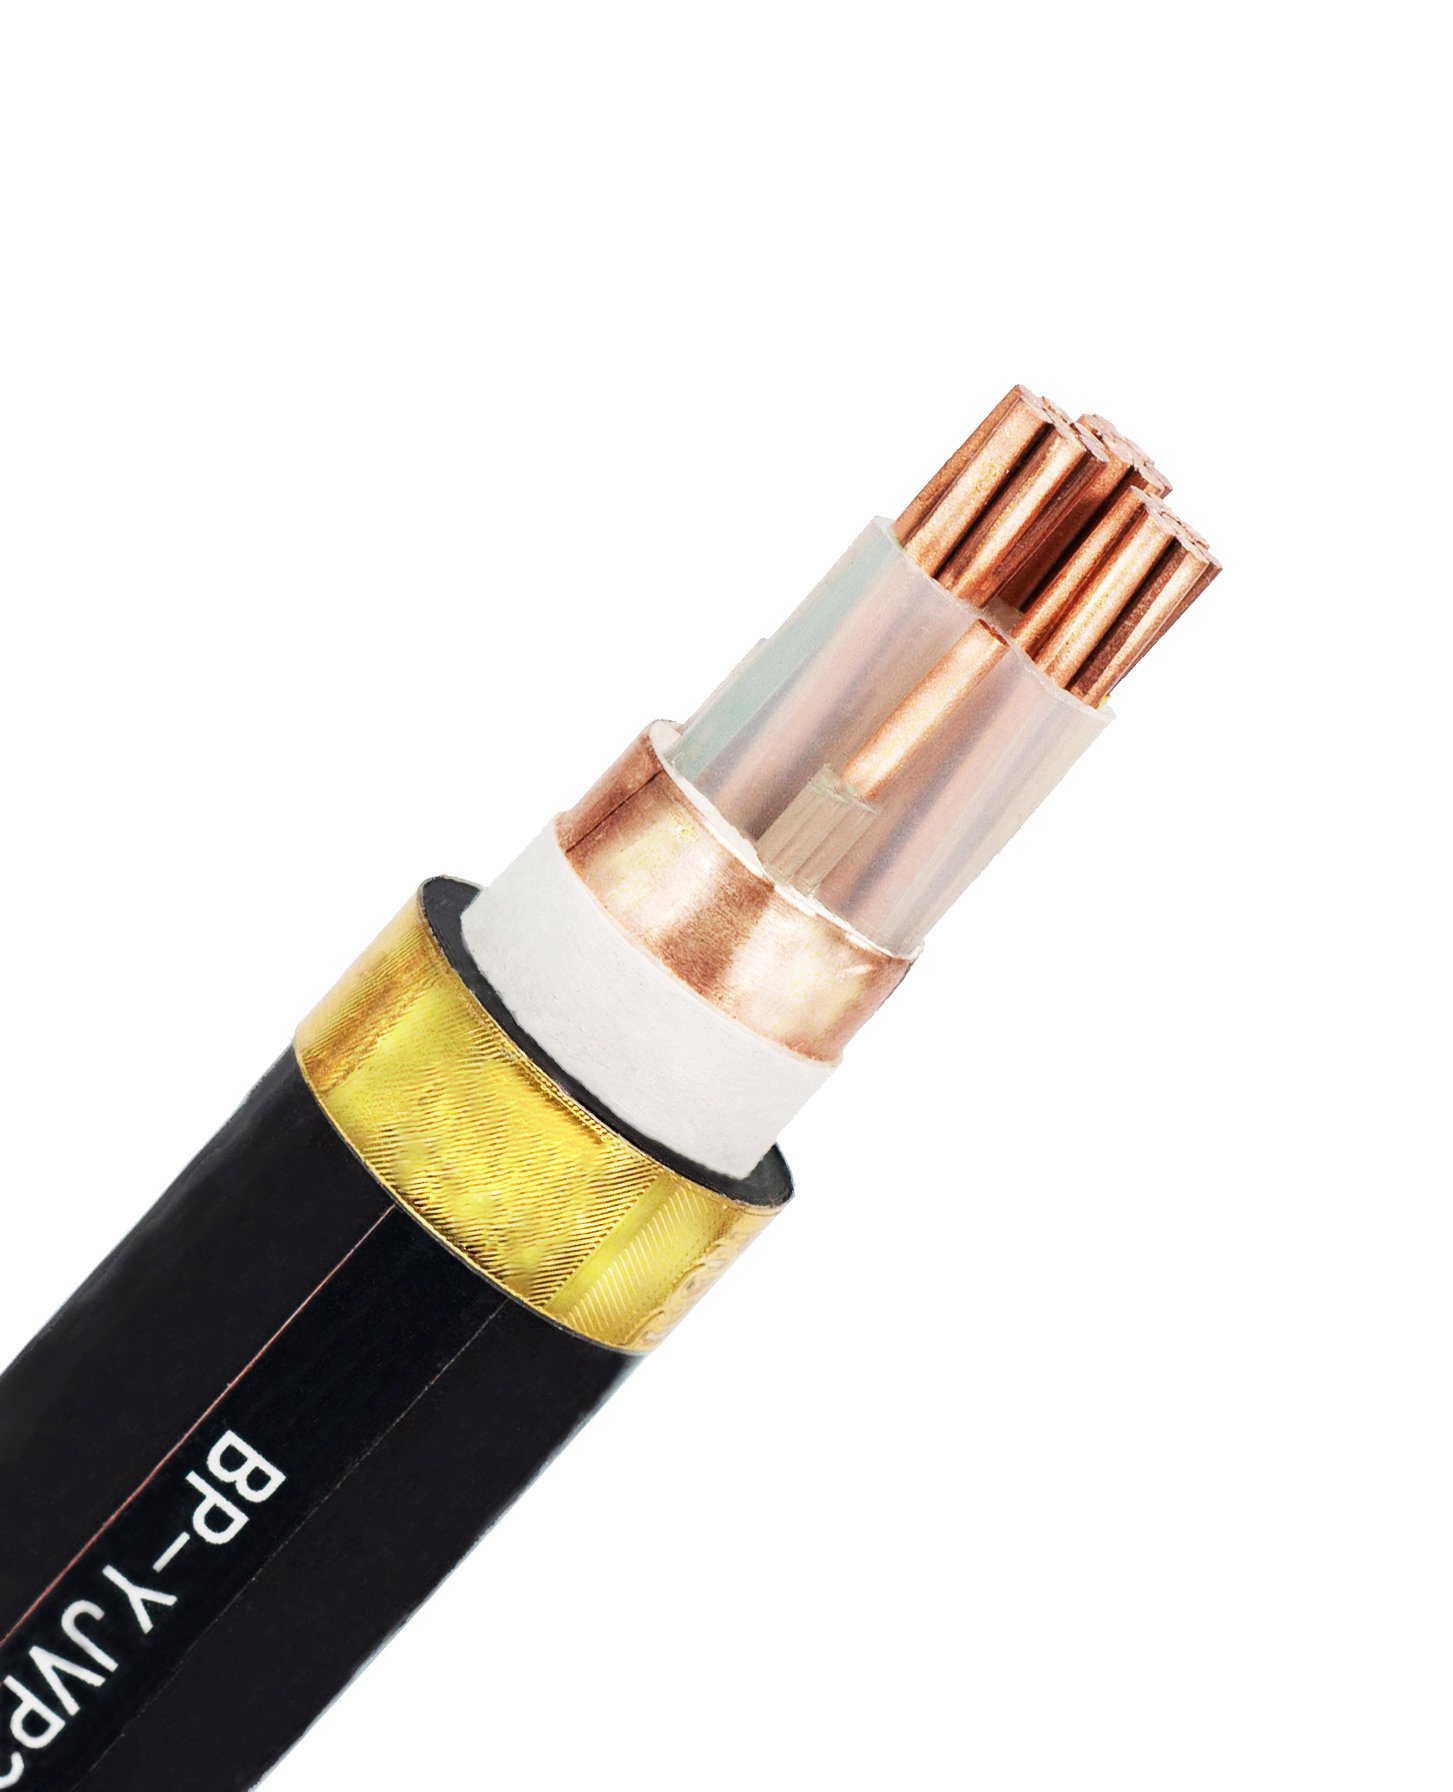 Europe Standard Rvv Cable Wire Copper Conductor Cable for Appliances with PVC 1.5mm 2.5mm 4mm 10mm Insulation 300 500V